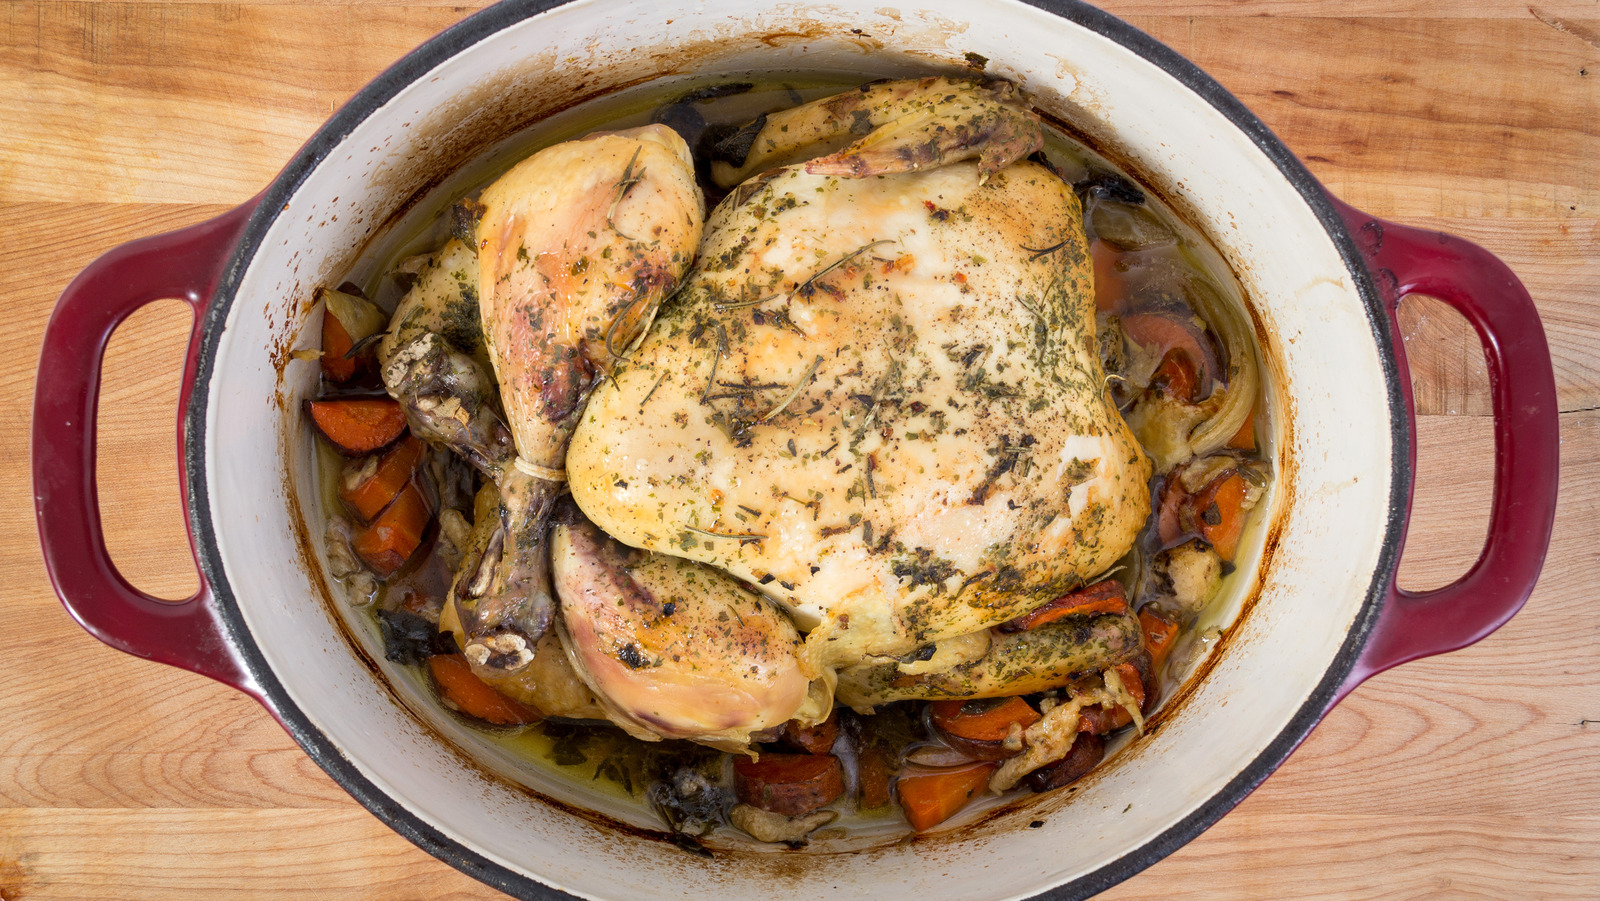 https://www.thedailymeal.com/img/gallery/the-13-things-you-need-to-know-about-slow-cooker-chicken/l-intro-1695647574.jpg